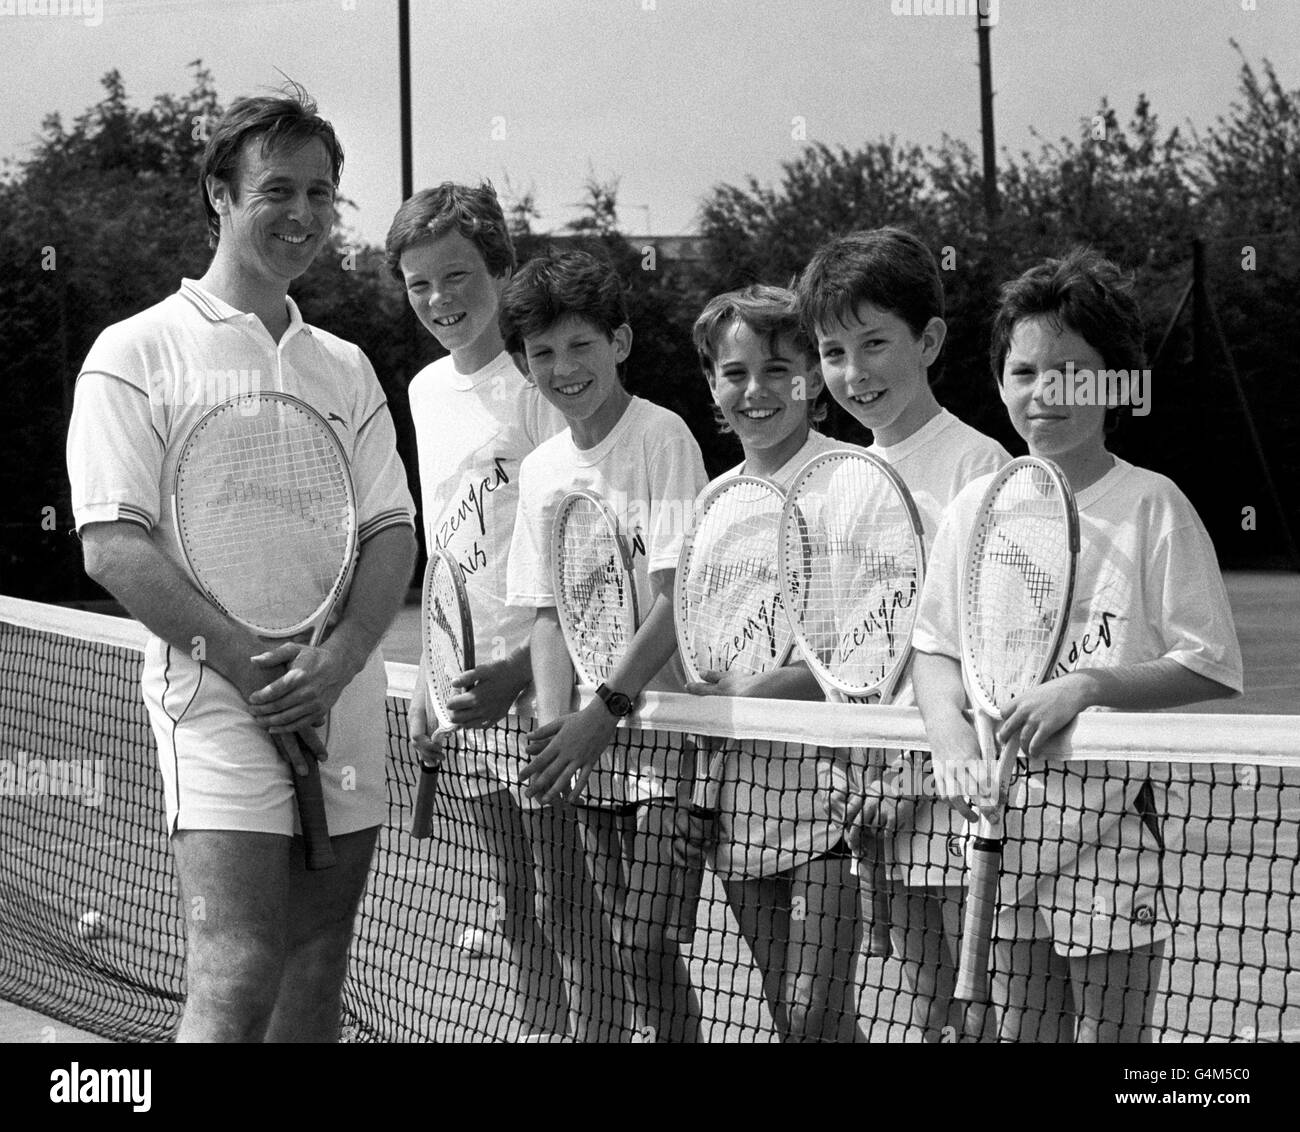 Tim Henman aged 13 (2nd boy from left), with head coach David Lloyd at the Slazenger Raquet Club. The Club had a scholarship scheme for promising young players, and was the brainchild of financier Jim Slater. Boys (from left): James Bailey, Tim Henman, David Loosemore, Paul Jessop, James Delgado. Stock Photo